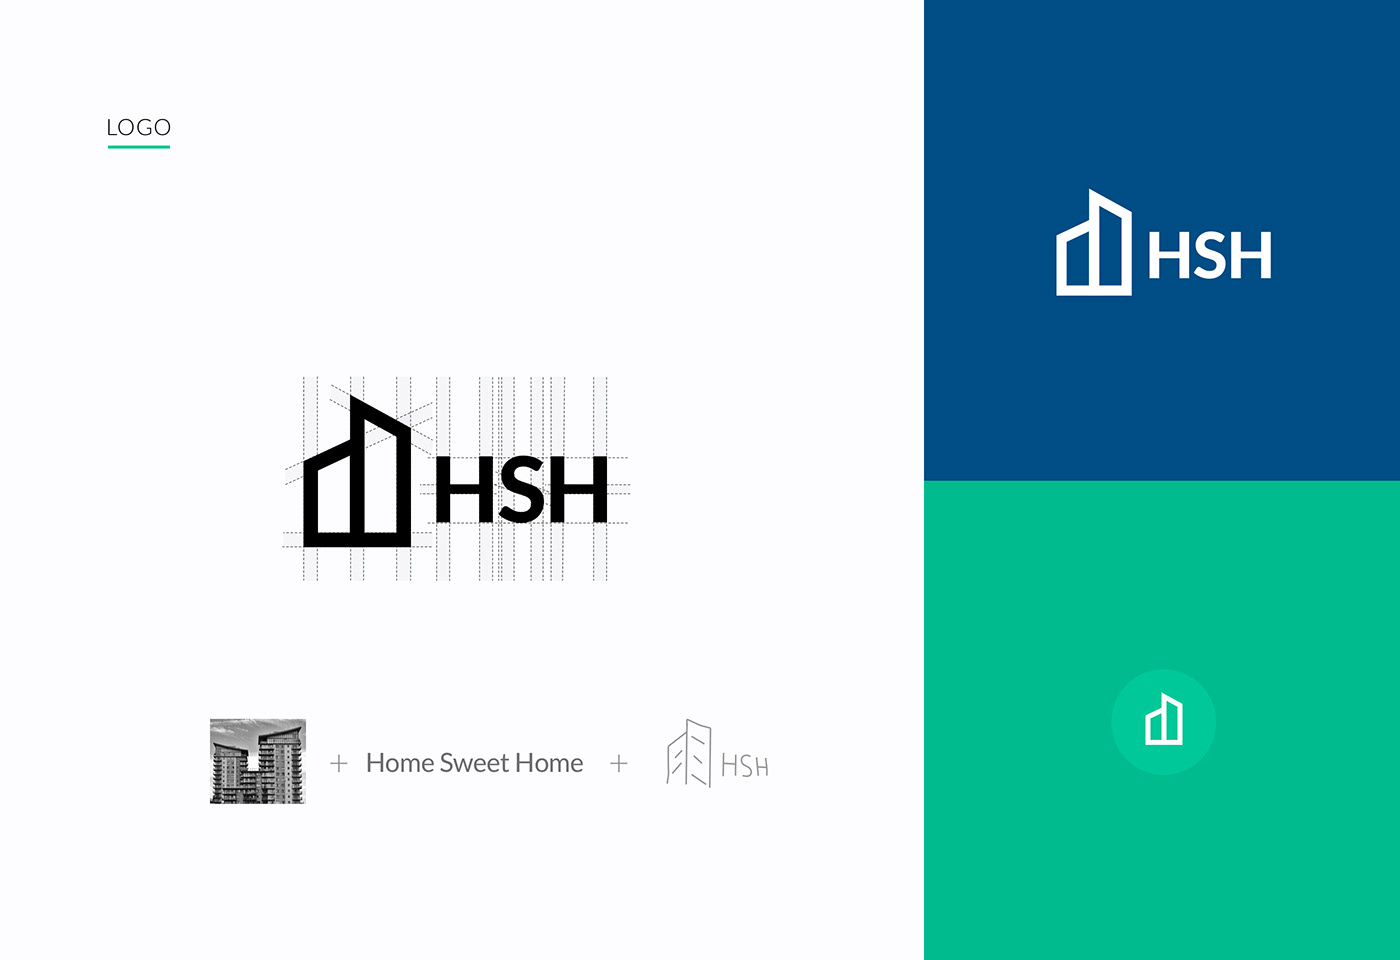 It shows a how the logo is created of real estate property project.